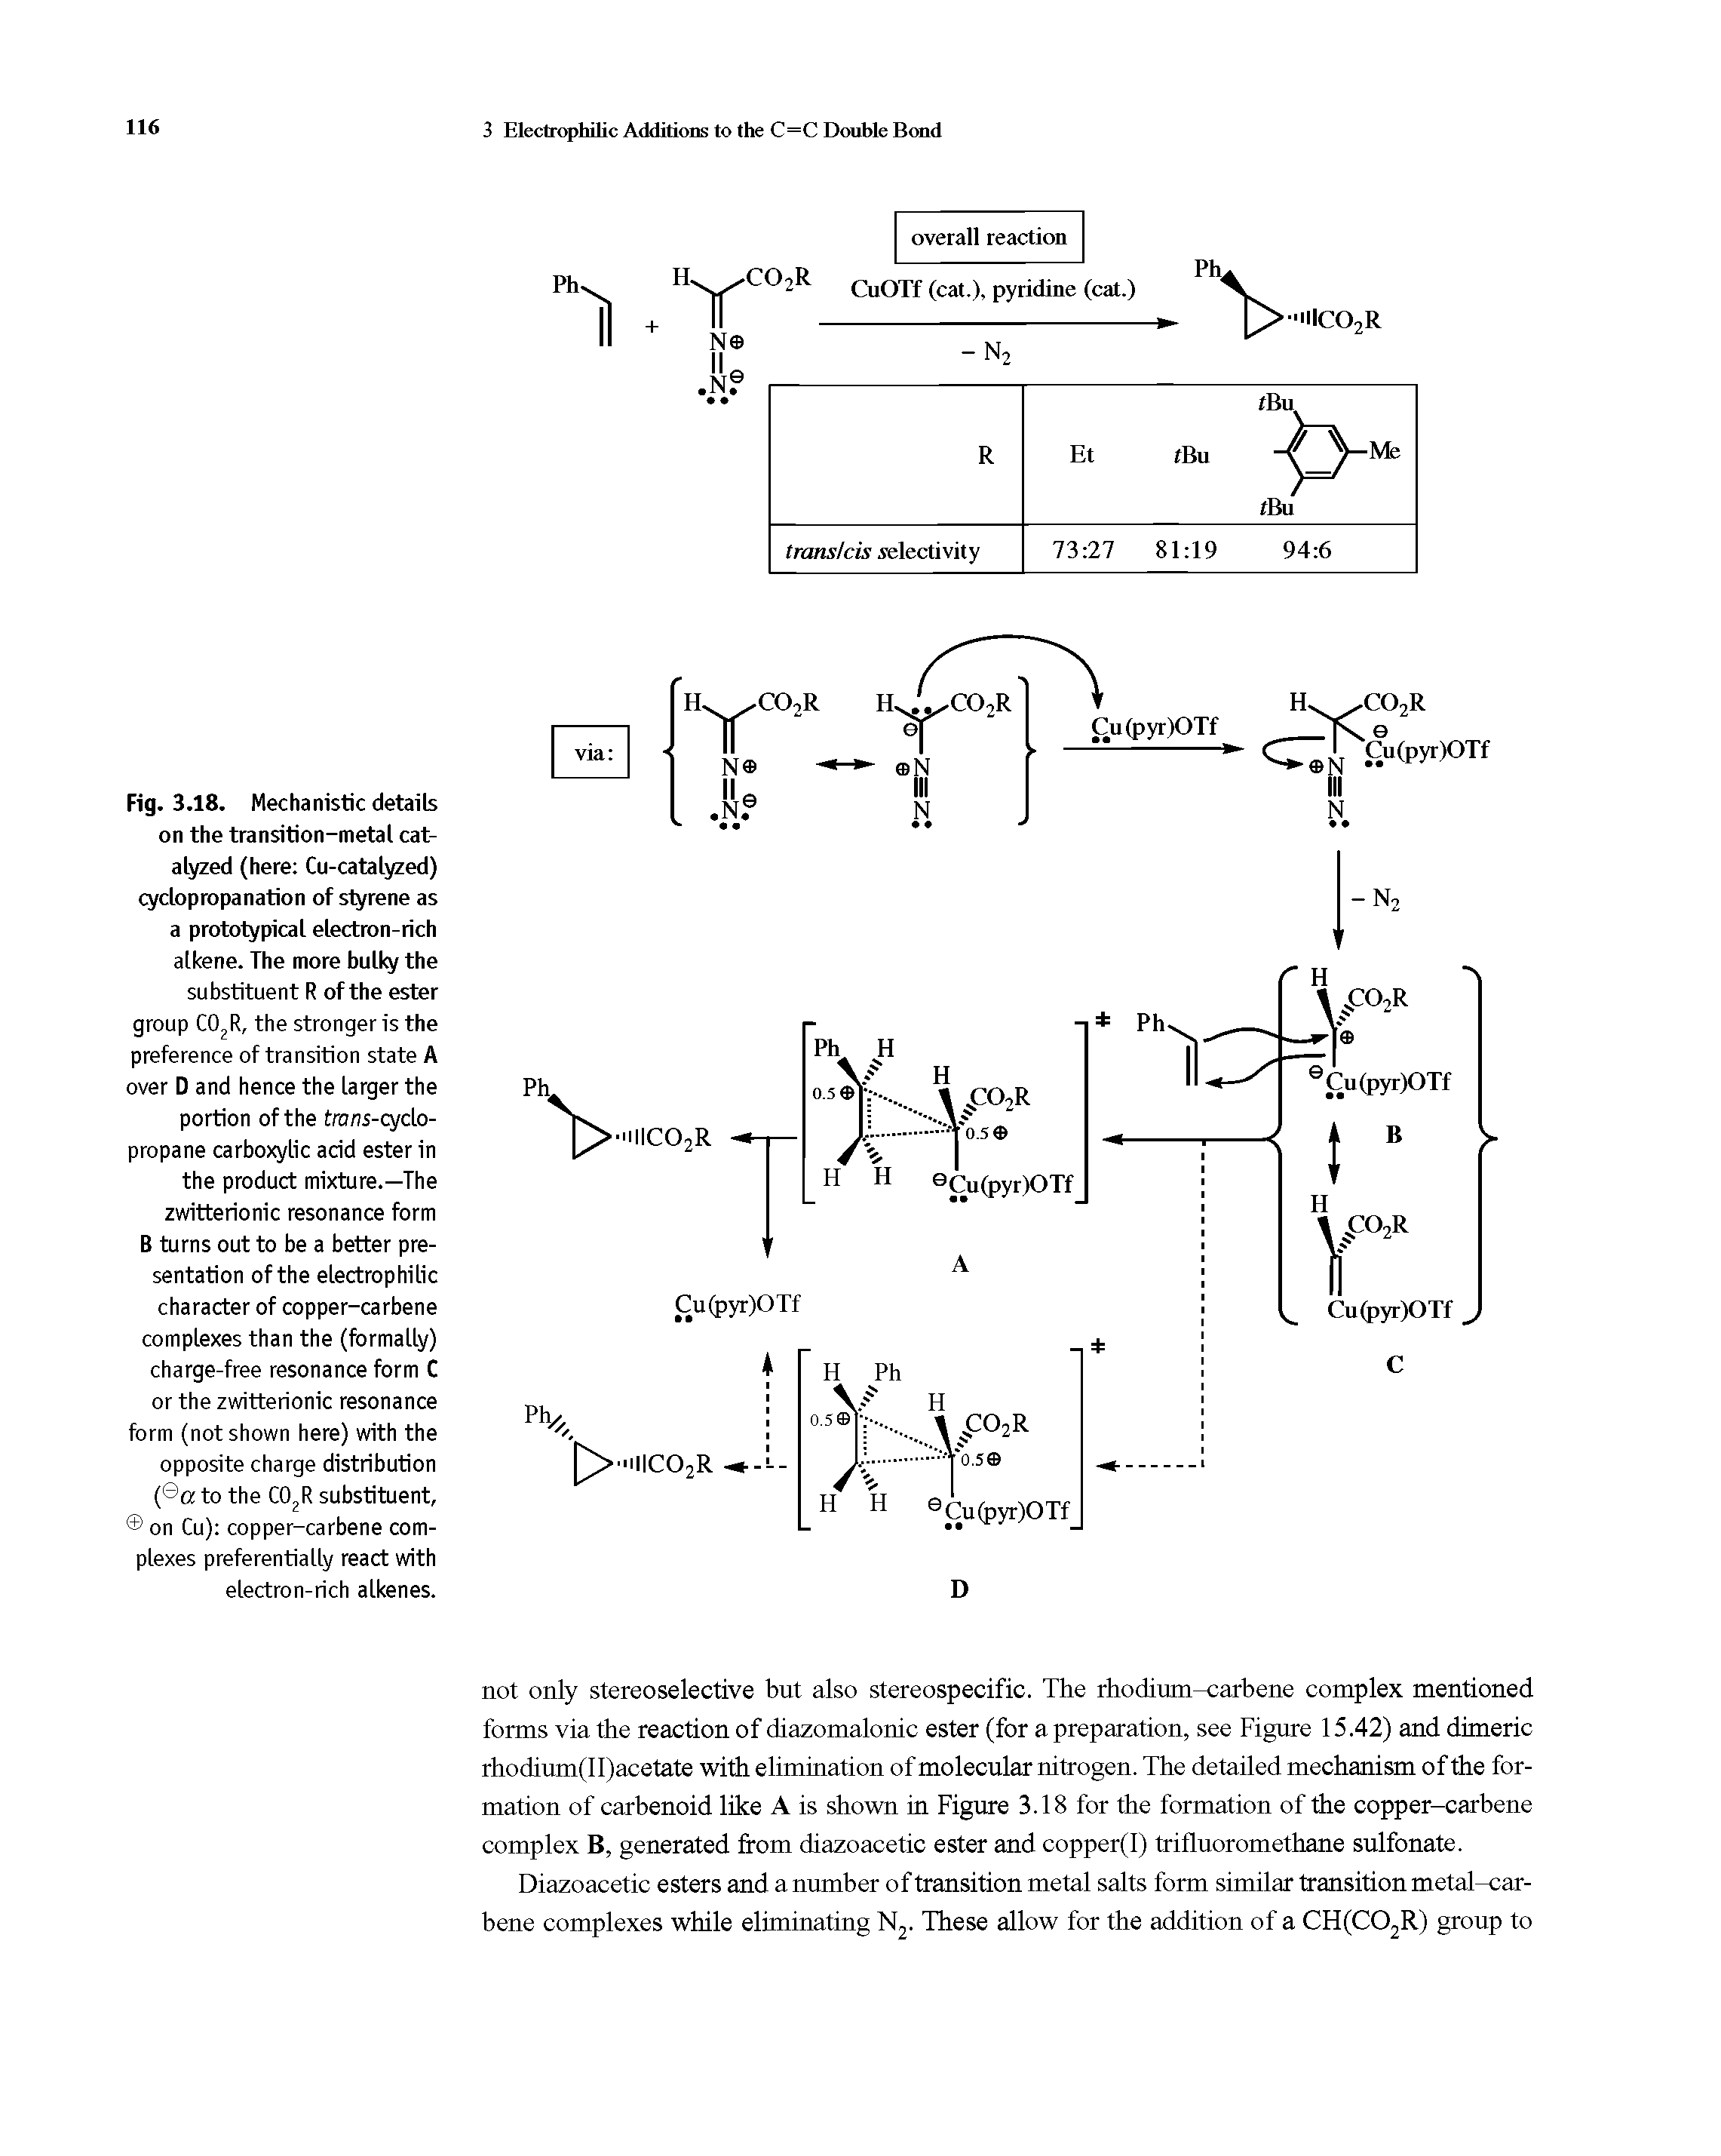 Fig. 3.18. Mechanistic details on the transition-metal catalyzed (here Cu-catalyzed) cyclopropanation of styrene as a prototypical electron-rich alkene. The more bulky the substituent R of the ester group C02R, the stronger is the preference of transition state A over D and hence the larger the portion of the trans-cyclo-propane carboxylic acid ester in the product mixture.—The zwitterionic resonance form B turns out to be a better presentation of the electrophilic character of copper-carbene complexes than the (formally) charge-free resonance form C or the zwitterionic resonance form (not shown here) with the opposite charge distribution ( a to the C02R substituent, on Cu) copper-carbene complexes preferentially react with electron-rich alkenes.